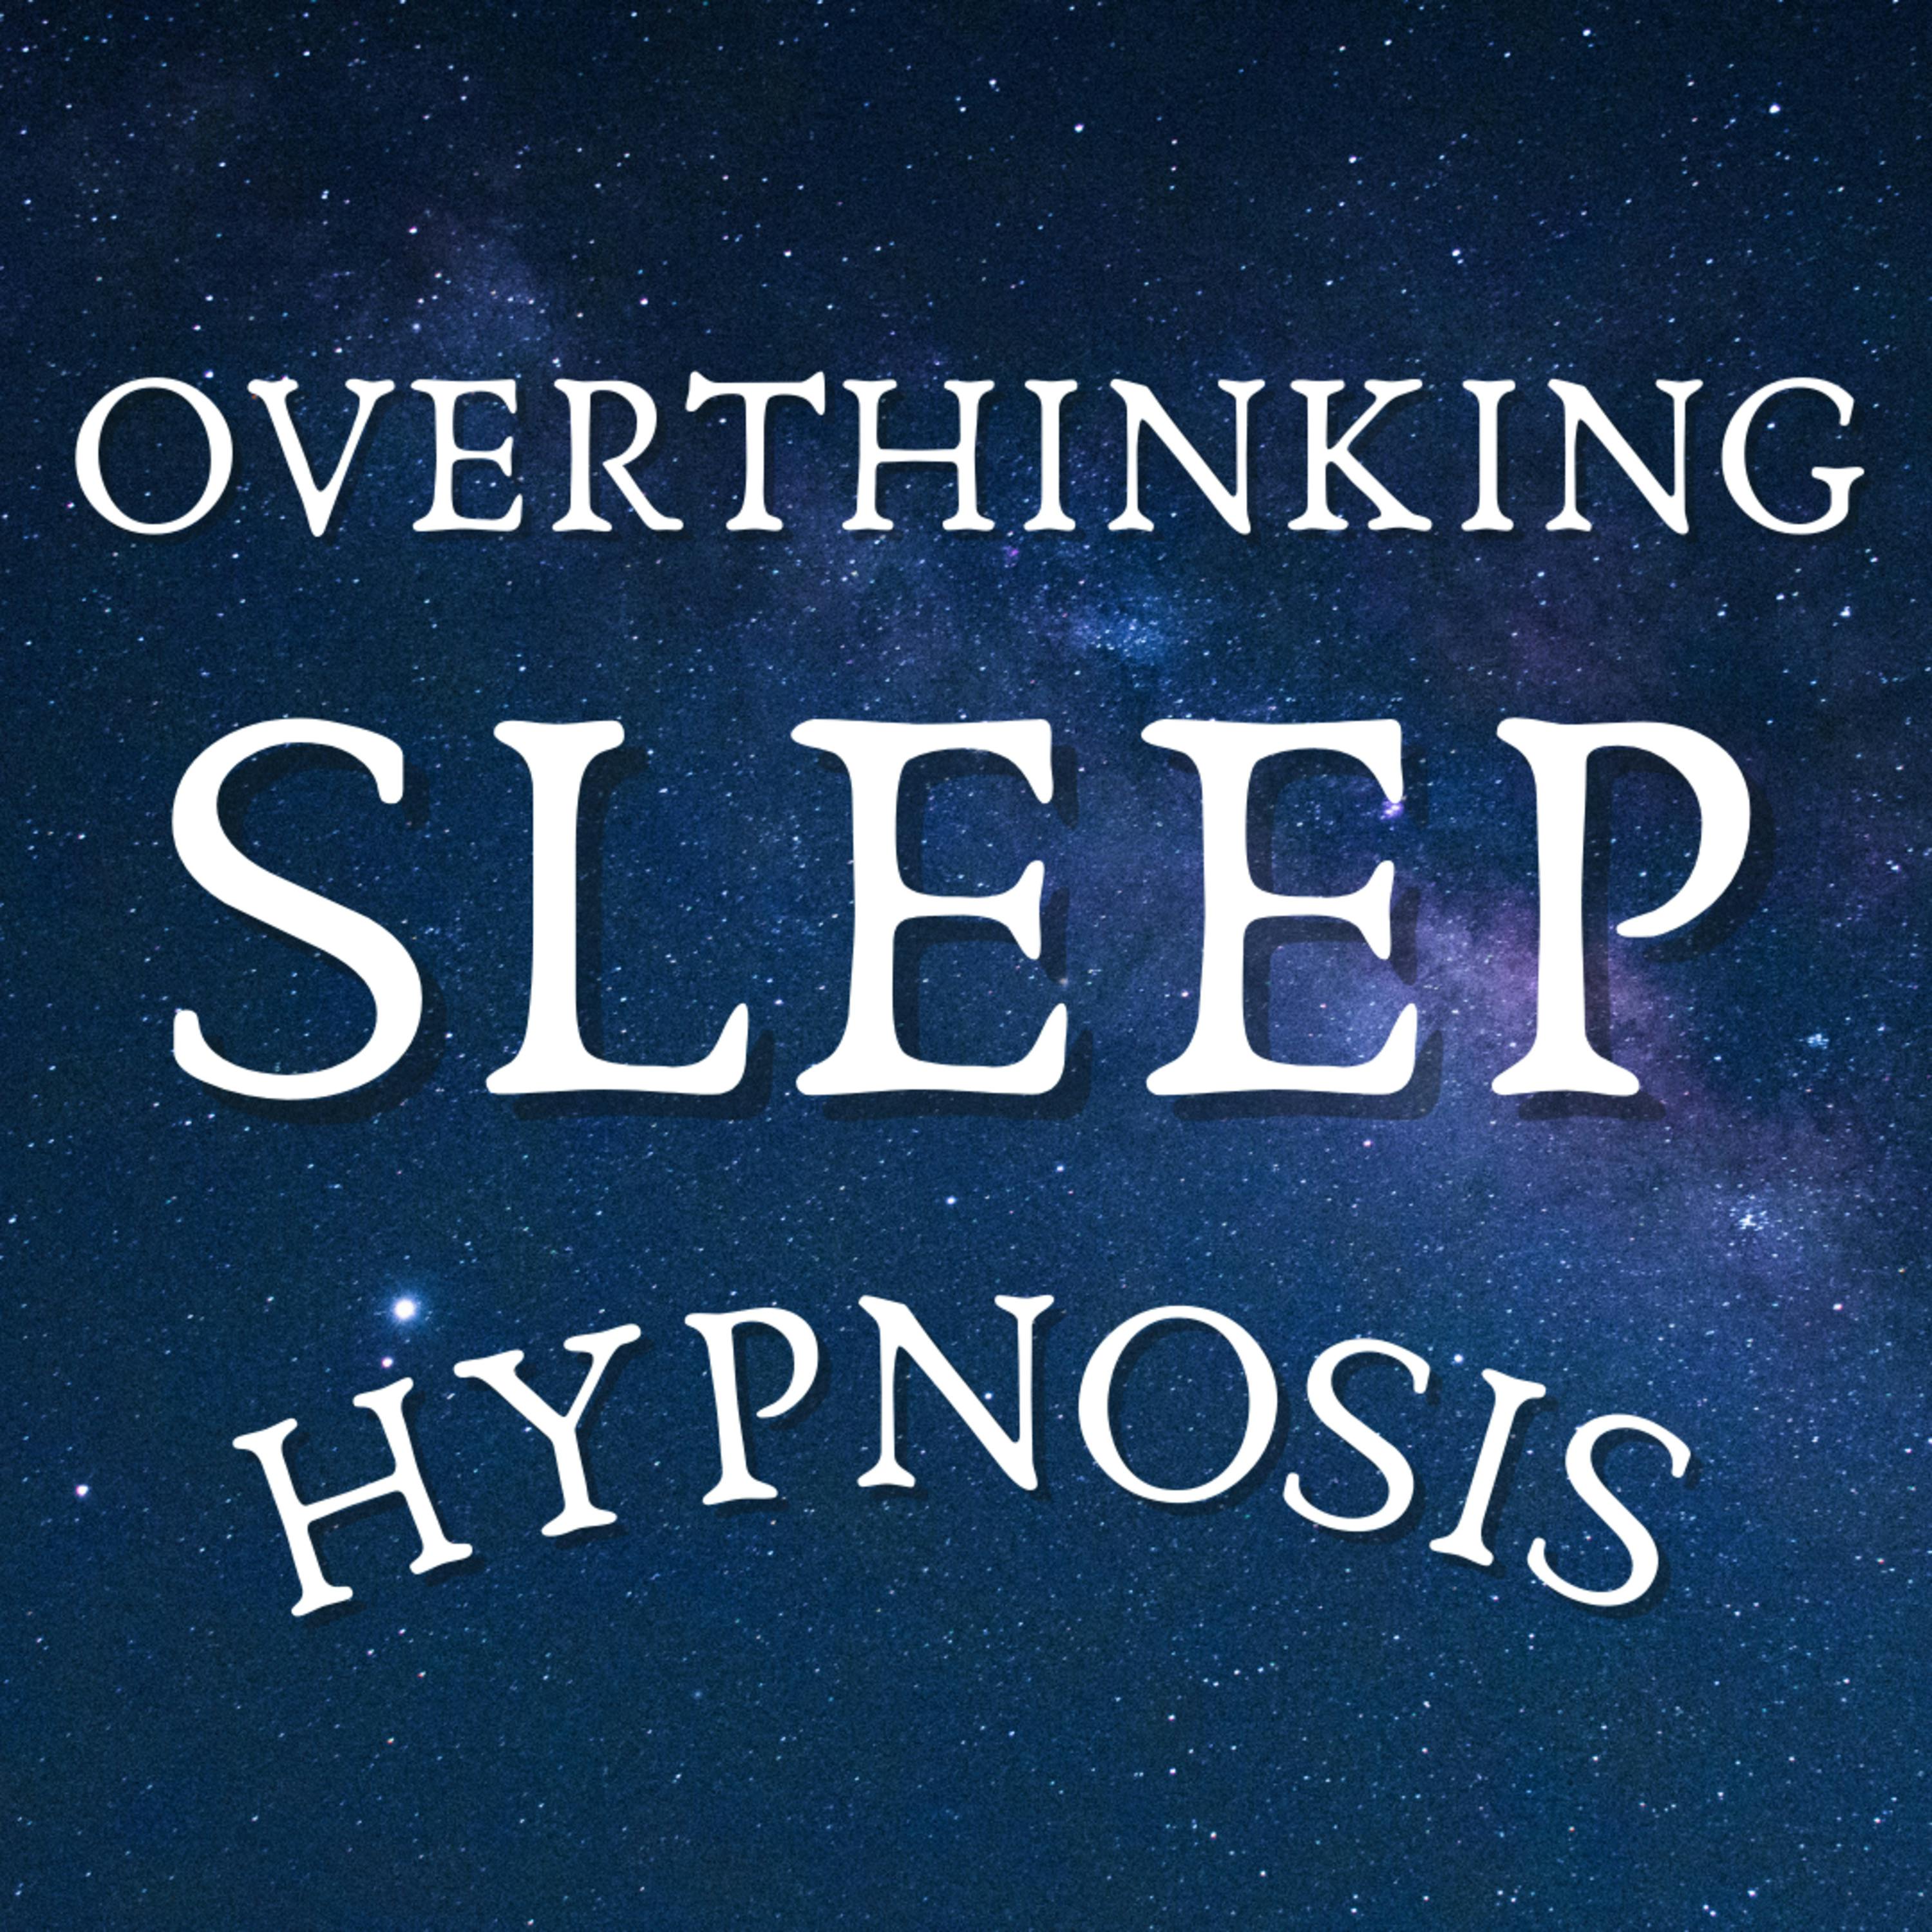 Sleep Hypnosis for Overthinking and an Overactive Mind